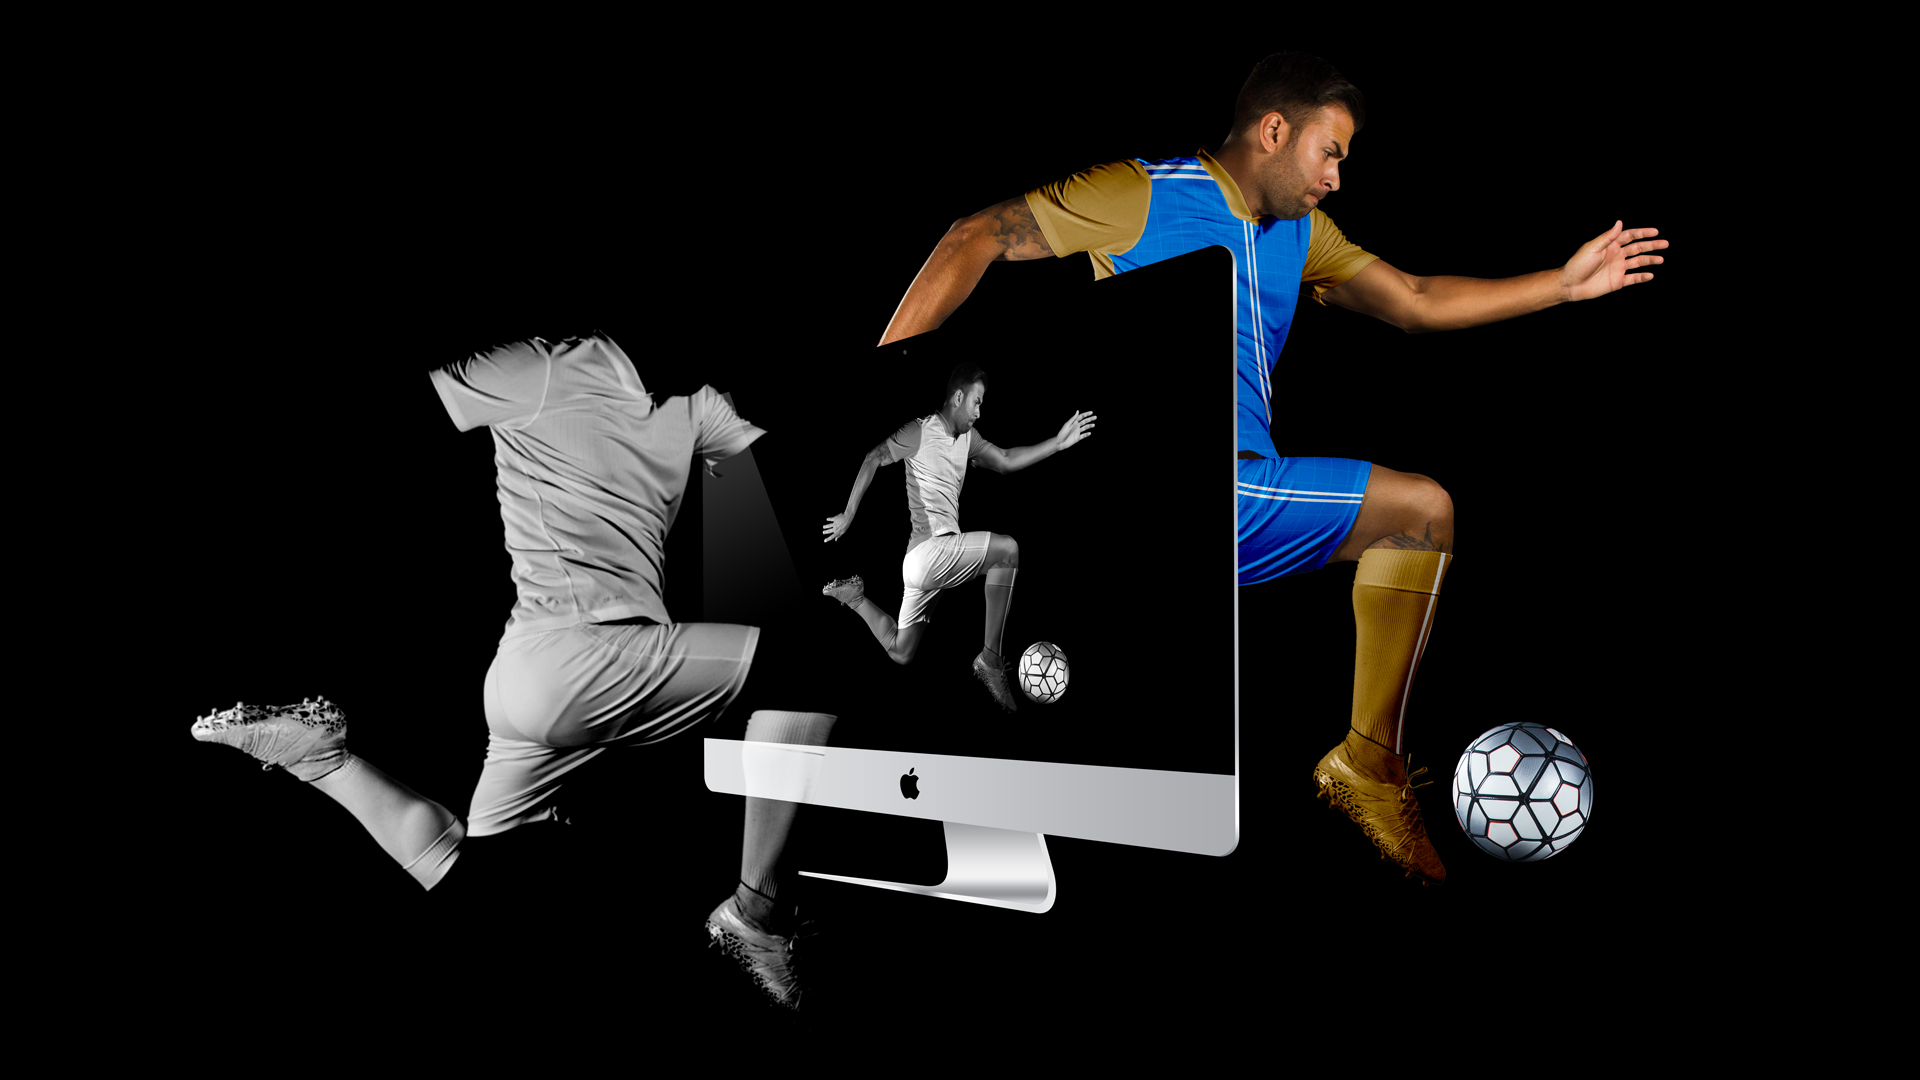 This image by PixelUp depicts a striking visual metaphor for their services. At first glance, a running sportsman is depicted solely by the outline of their attire, presented in black and white. The figure appears to enter into an iMac, with the screen monitor displaying the sportsman in full detail, still in black and white. However, upon closer inspection, behind the iMac, the sportsman emerges in vibrant colour. This captivating imagery symbolizes the transformative impact of PixelUp's expertise in crafting Custom WordPress and WooCommerce Websites. It beautifully captures the essence of their work – the ability to enhance and elevate your online presence, turning ordinary into extraordinary.